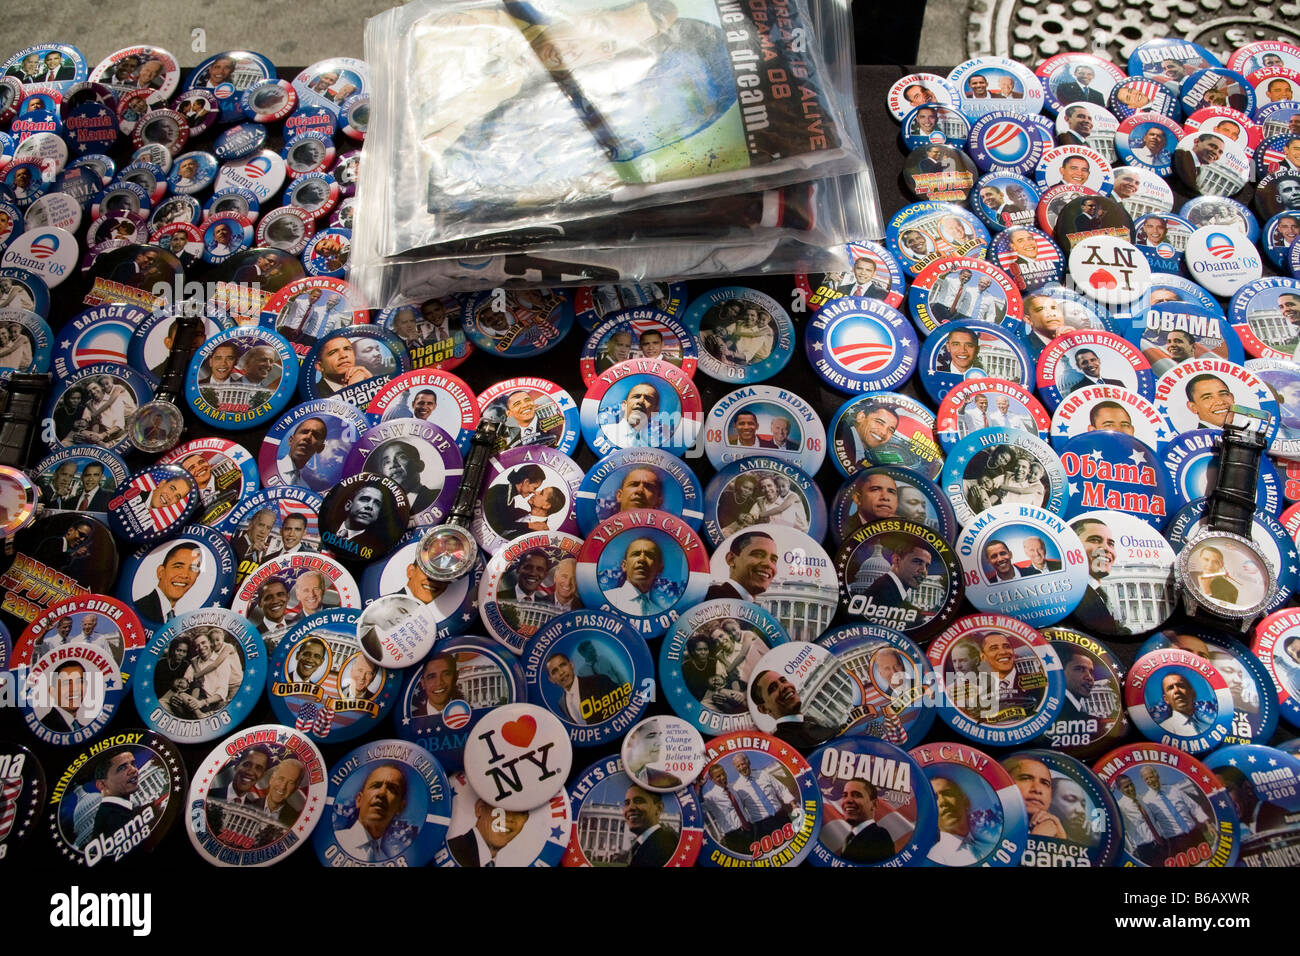 Obama buttons New York City Stock Photo